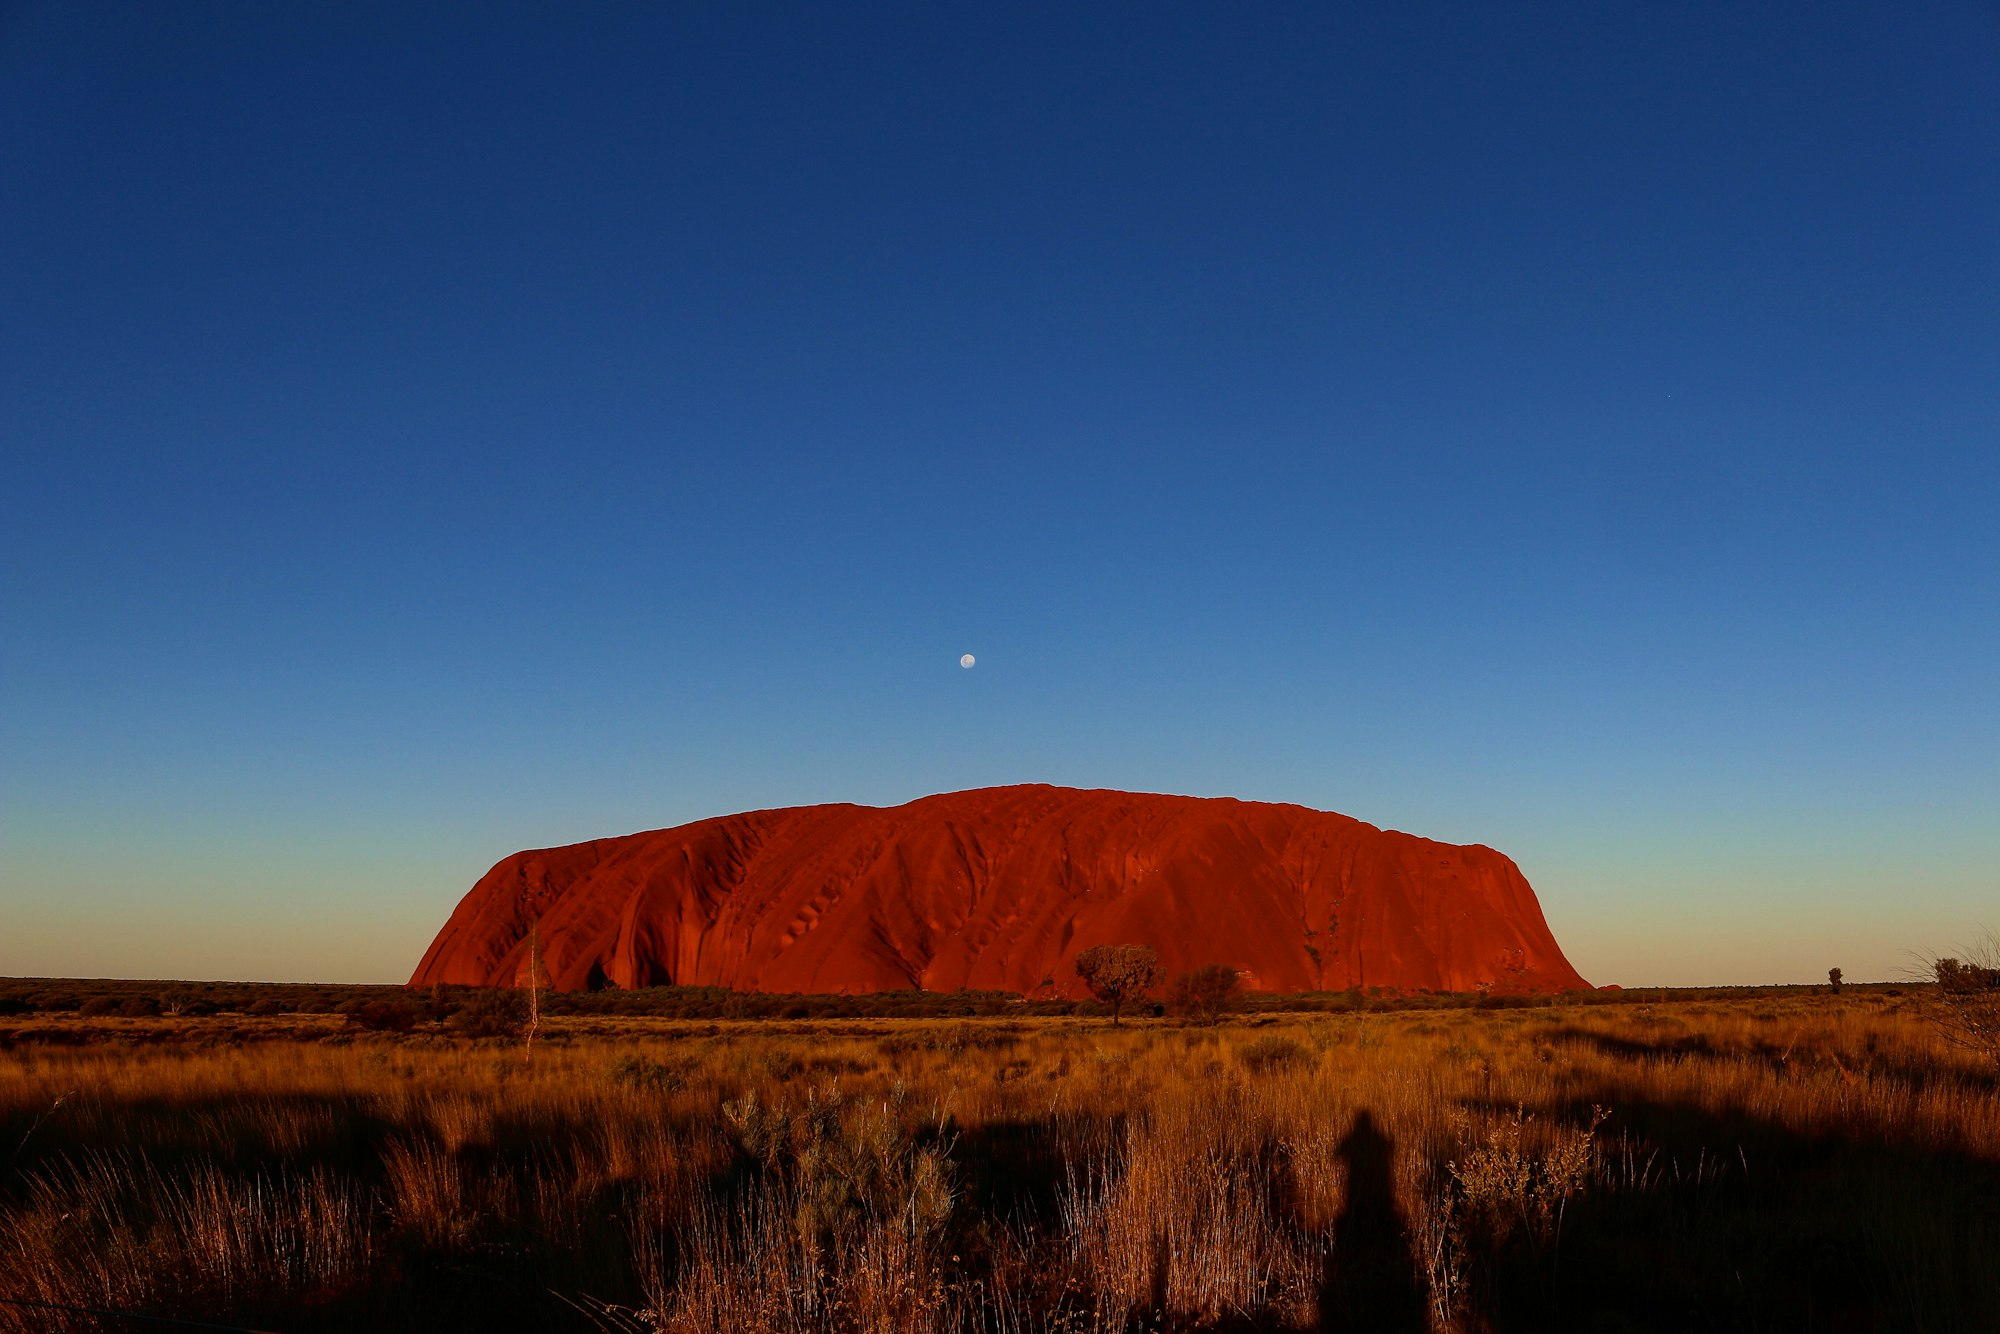 If you ever get to visit Uluru please make sure that you visit it during a sunset and a sunrise. Truely spectacular.